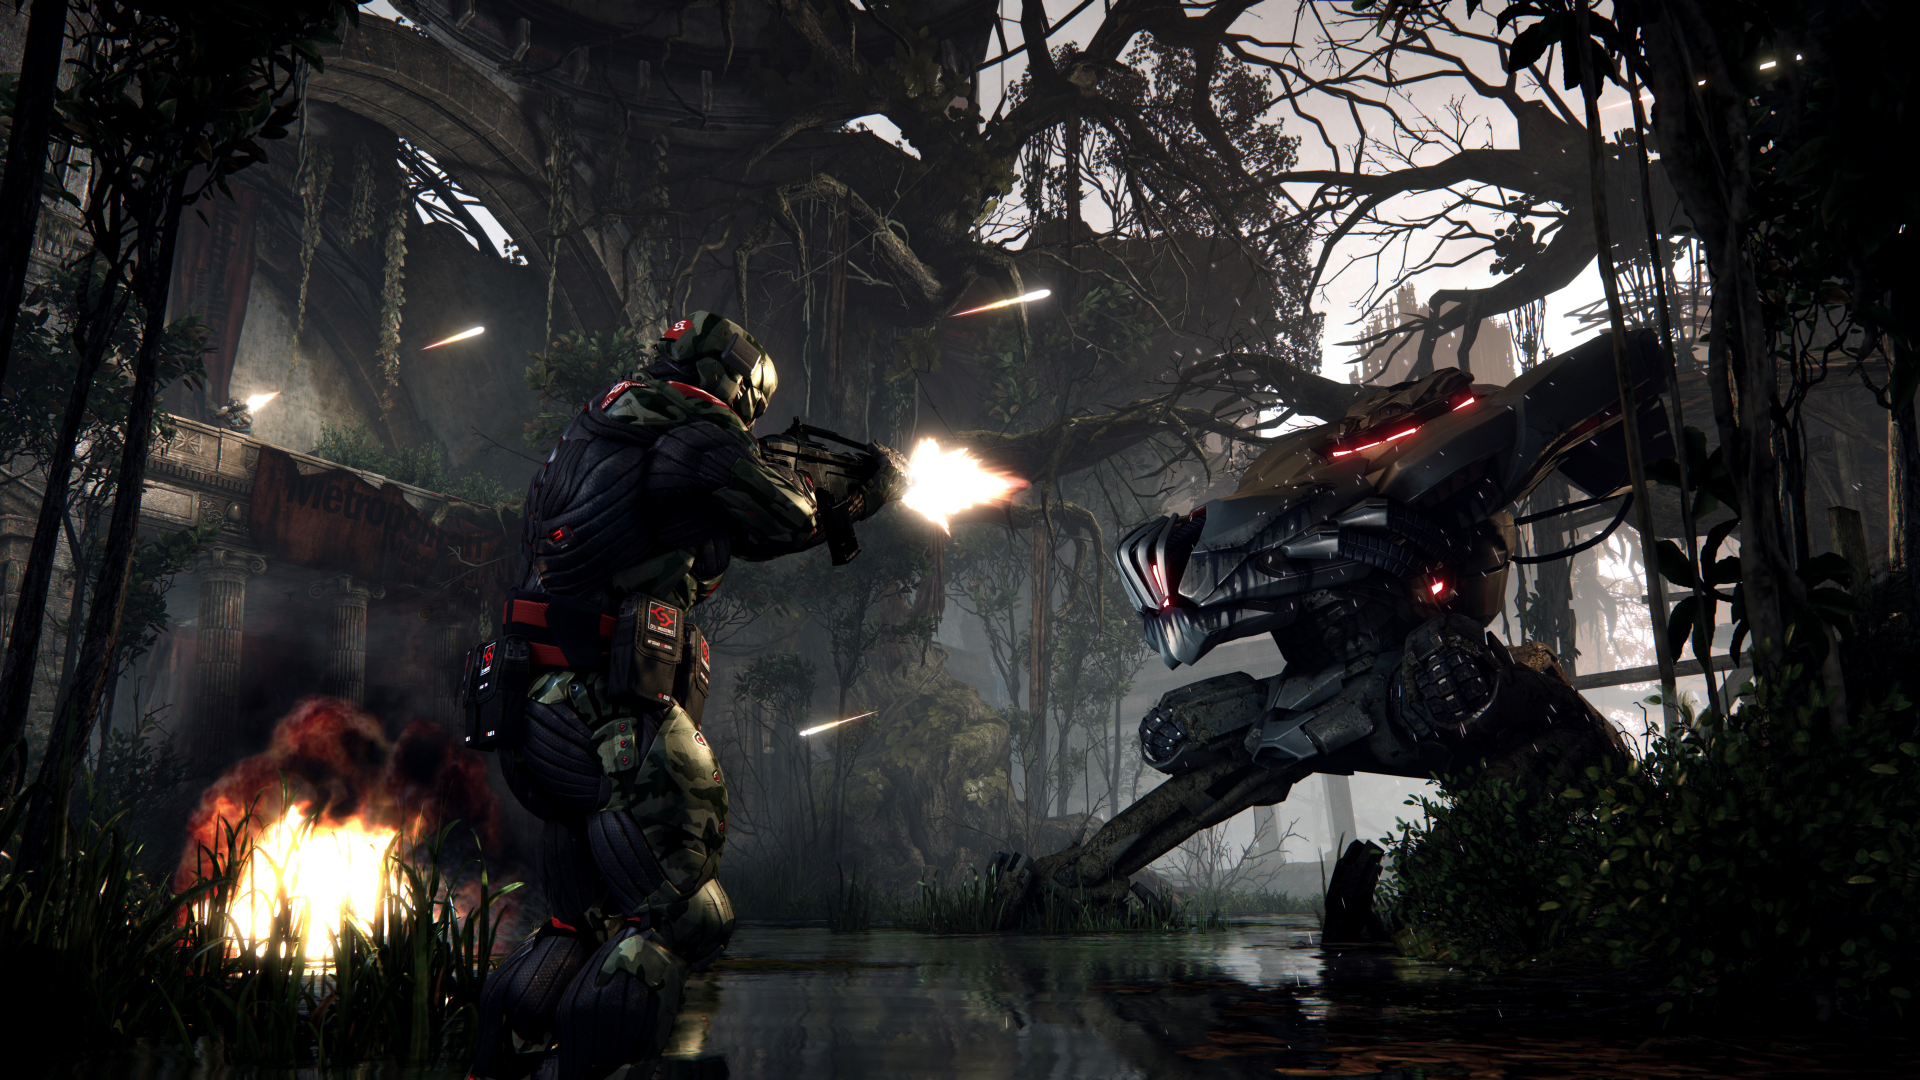 Media asset (photo, screenshot, or image in full size) related to contents posted at 3dfxzone.it | Image Name: news18970Crysis-3-screenshots_4.png